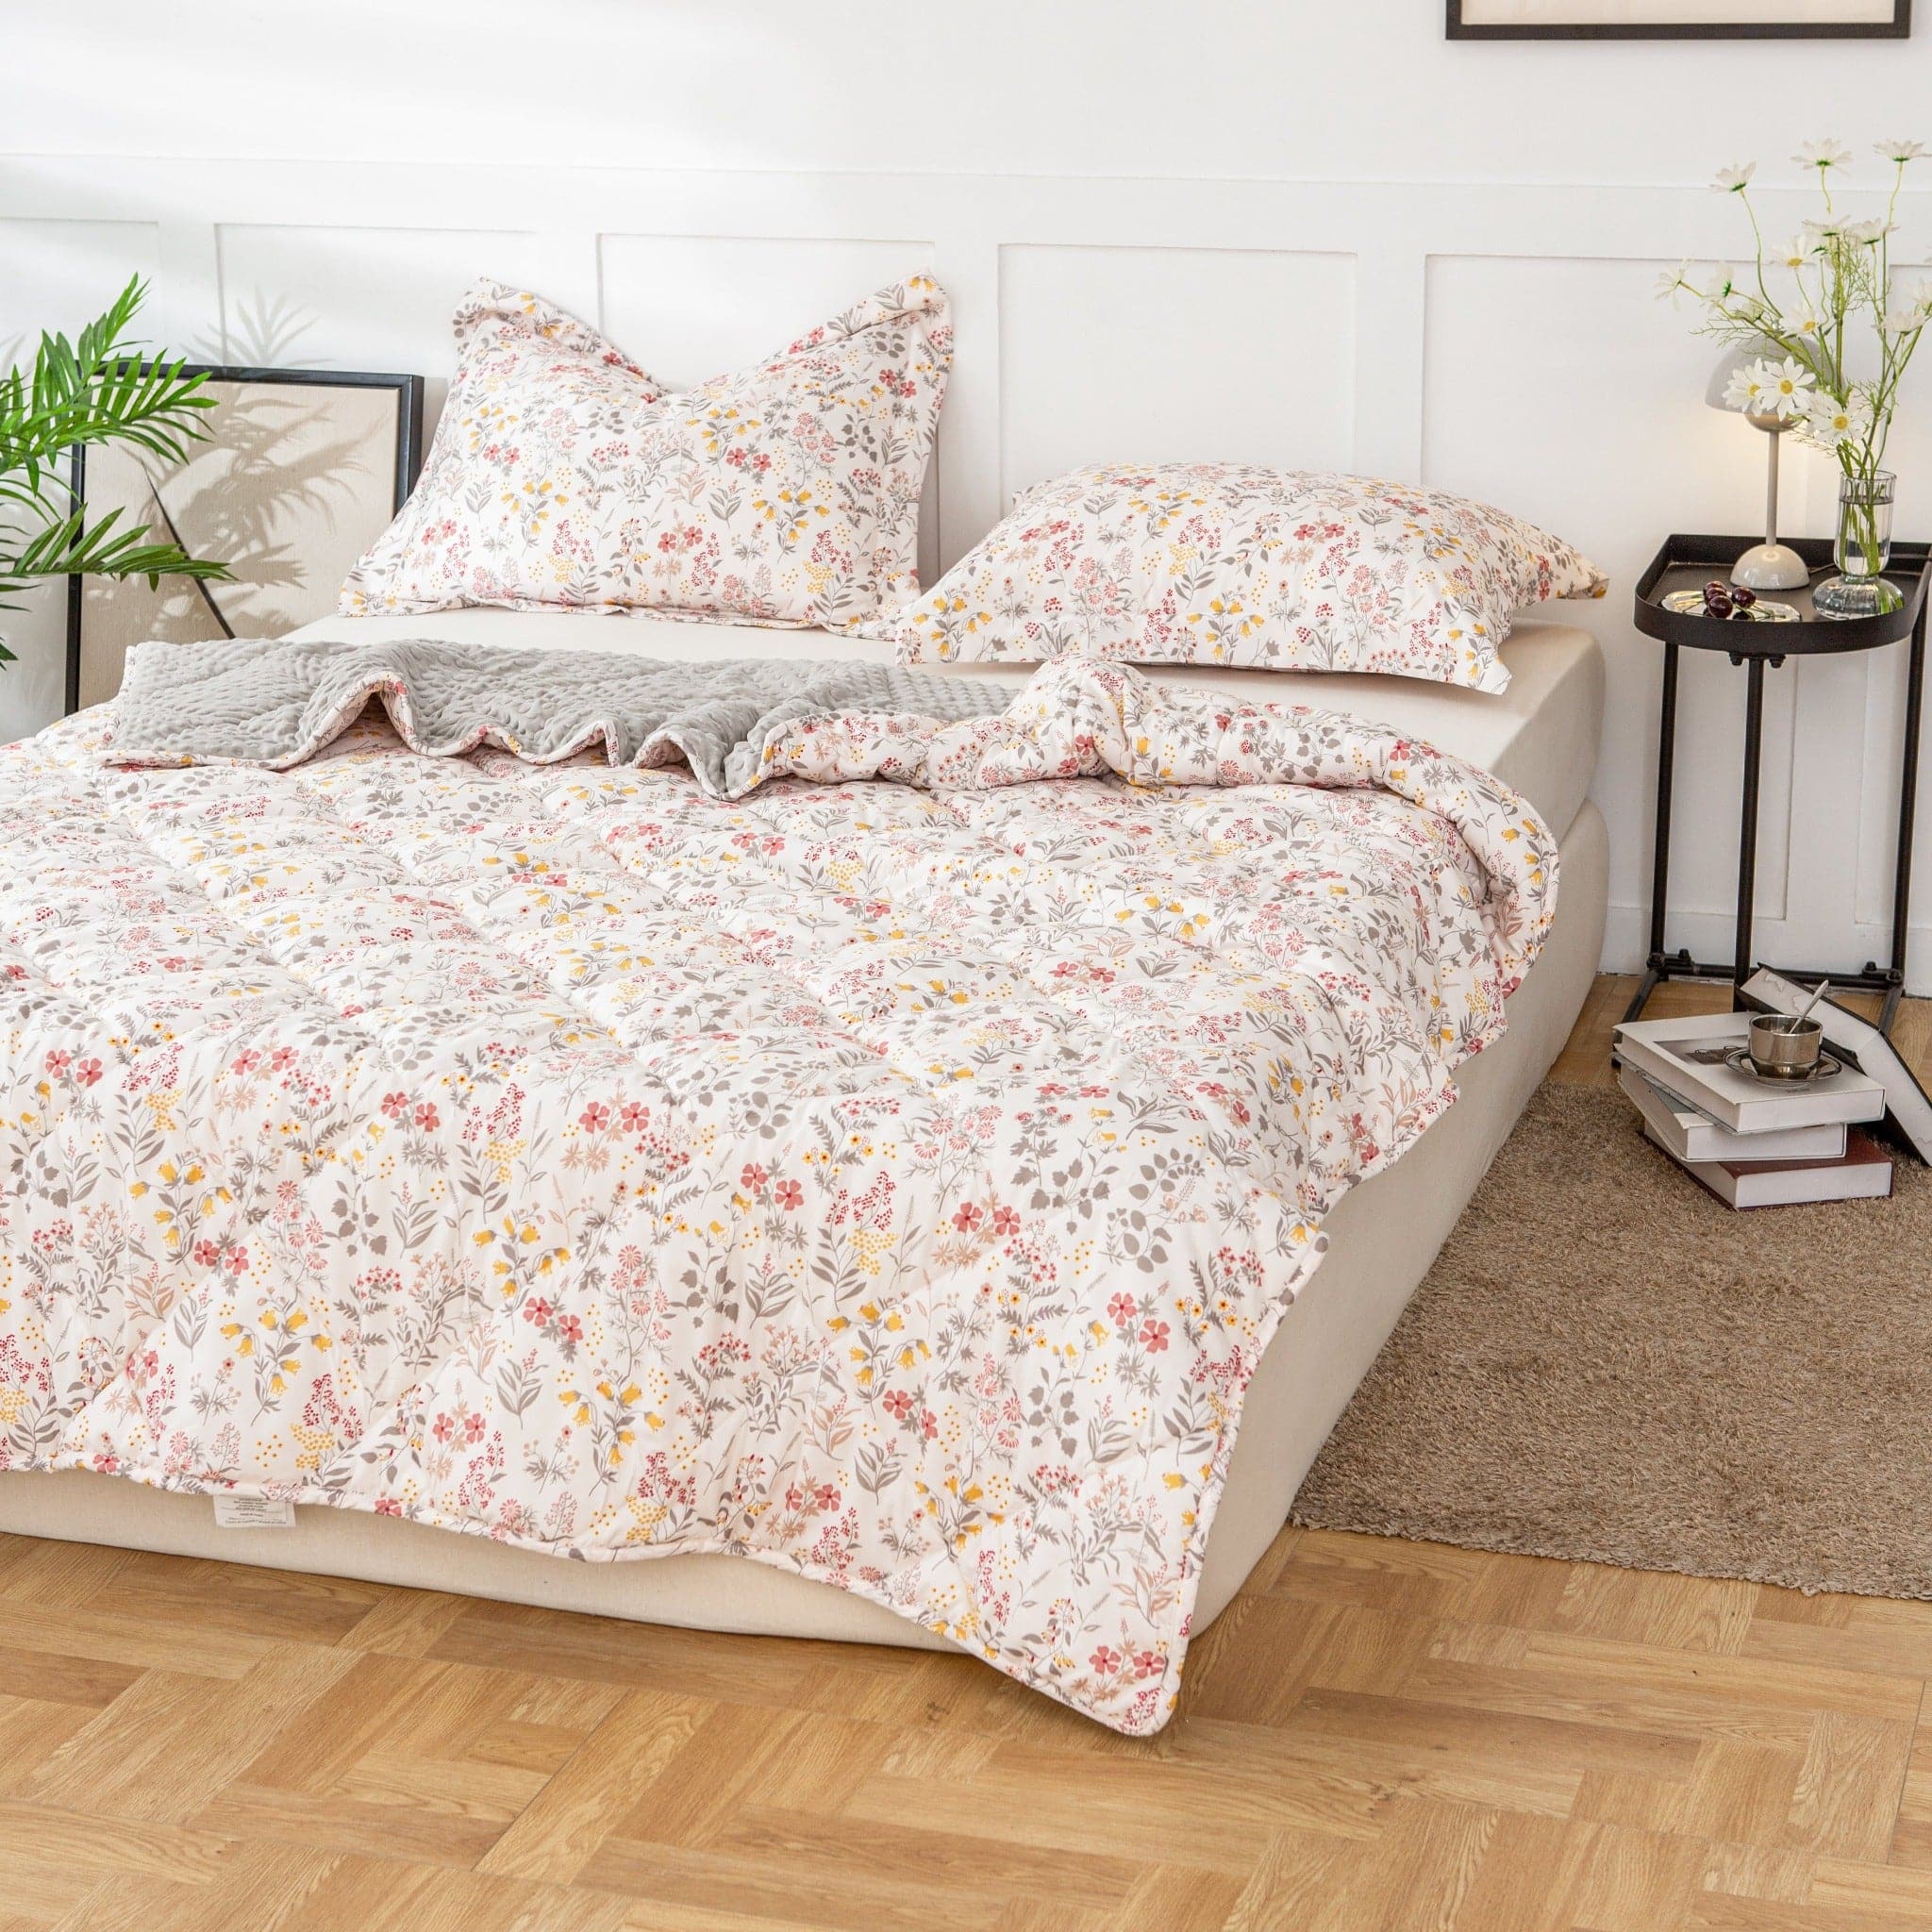 Sweet Blossoms Comforter and Pillows